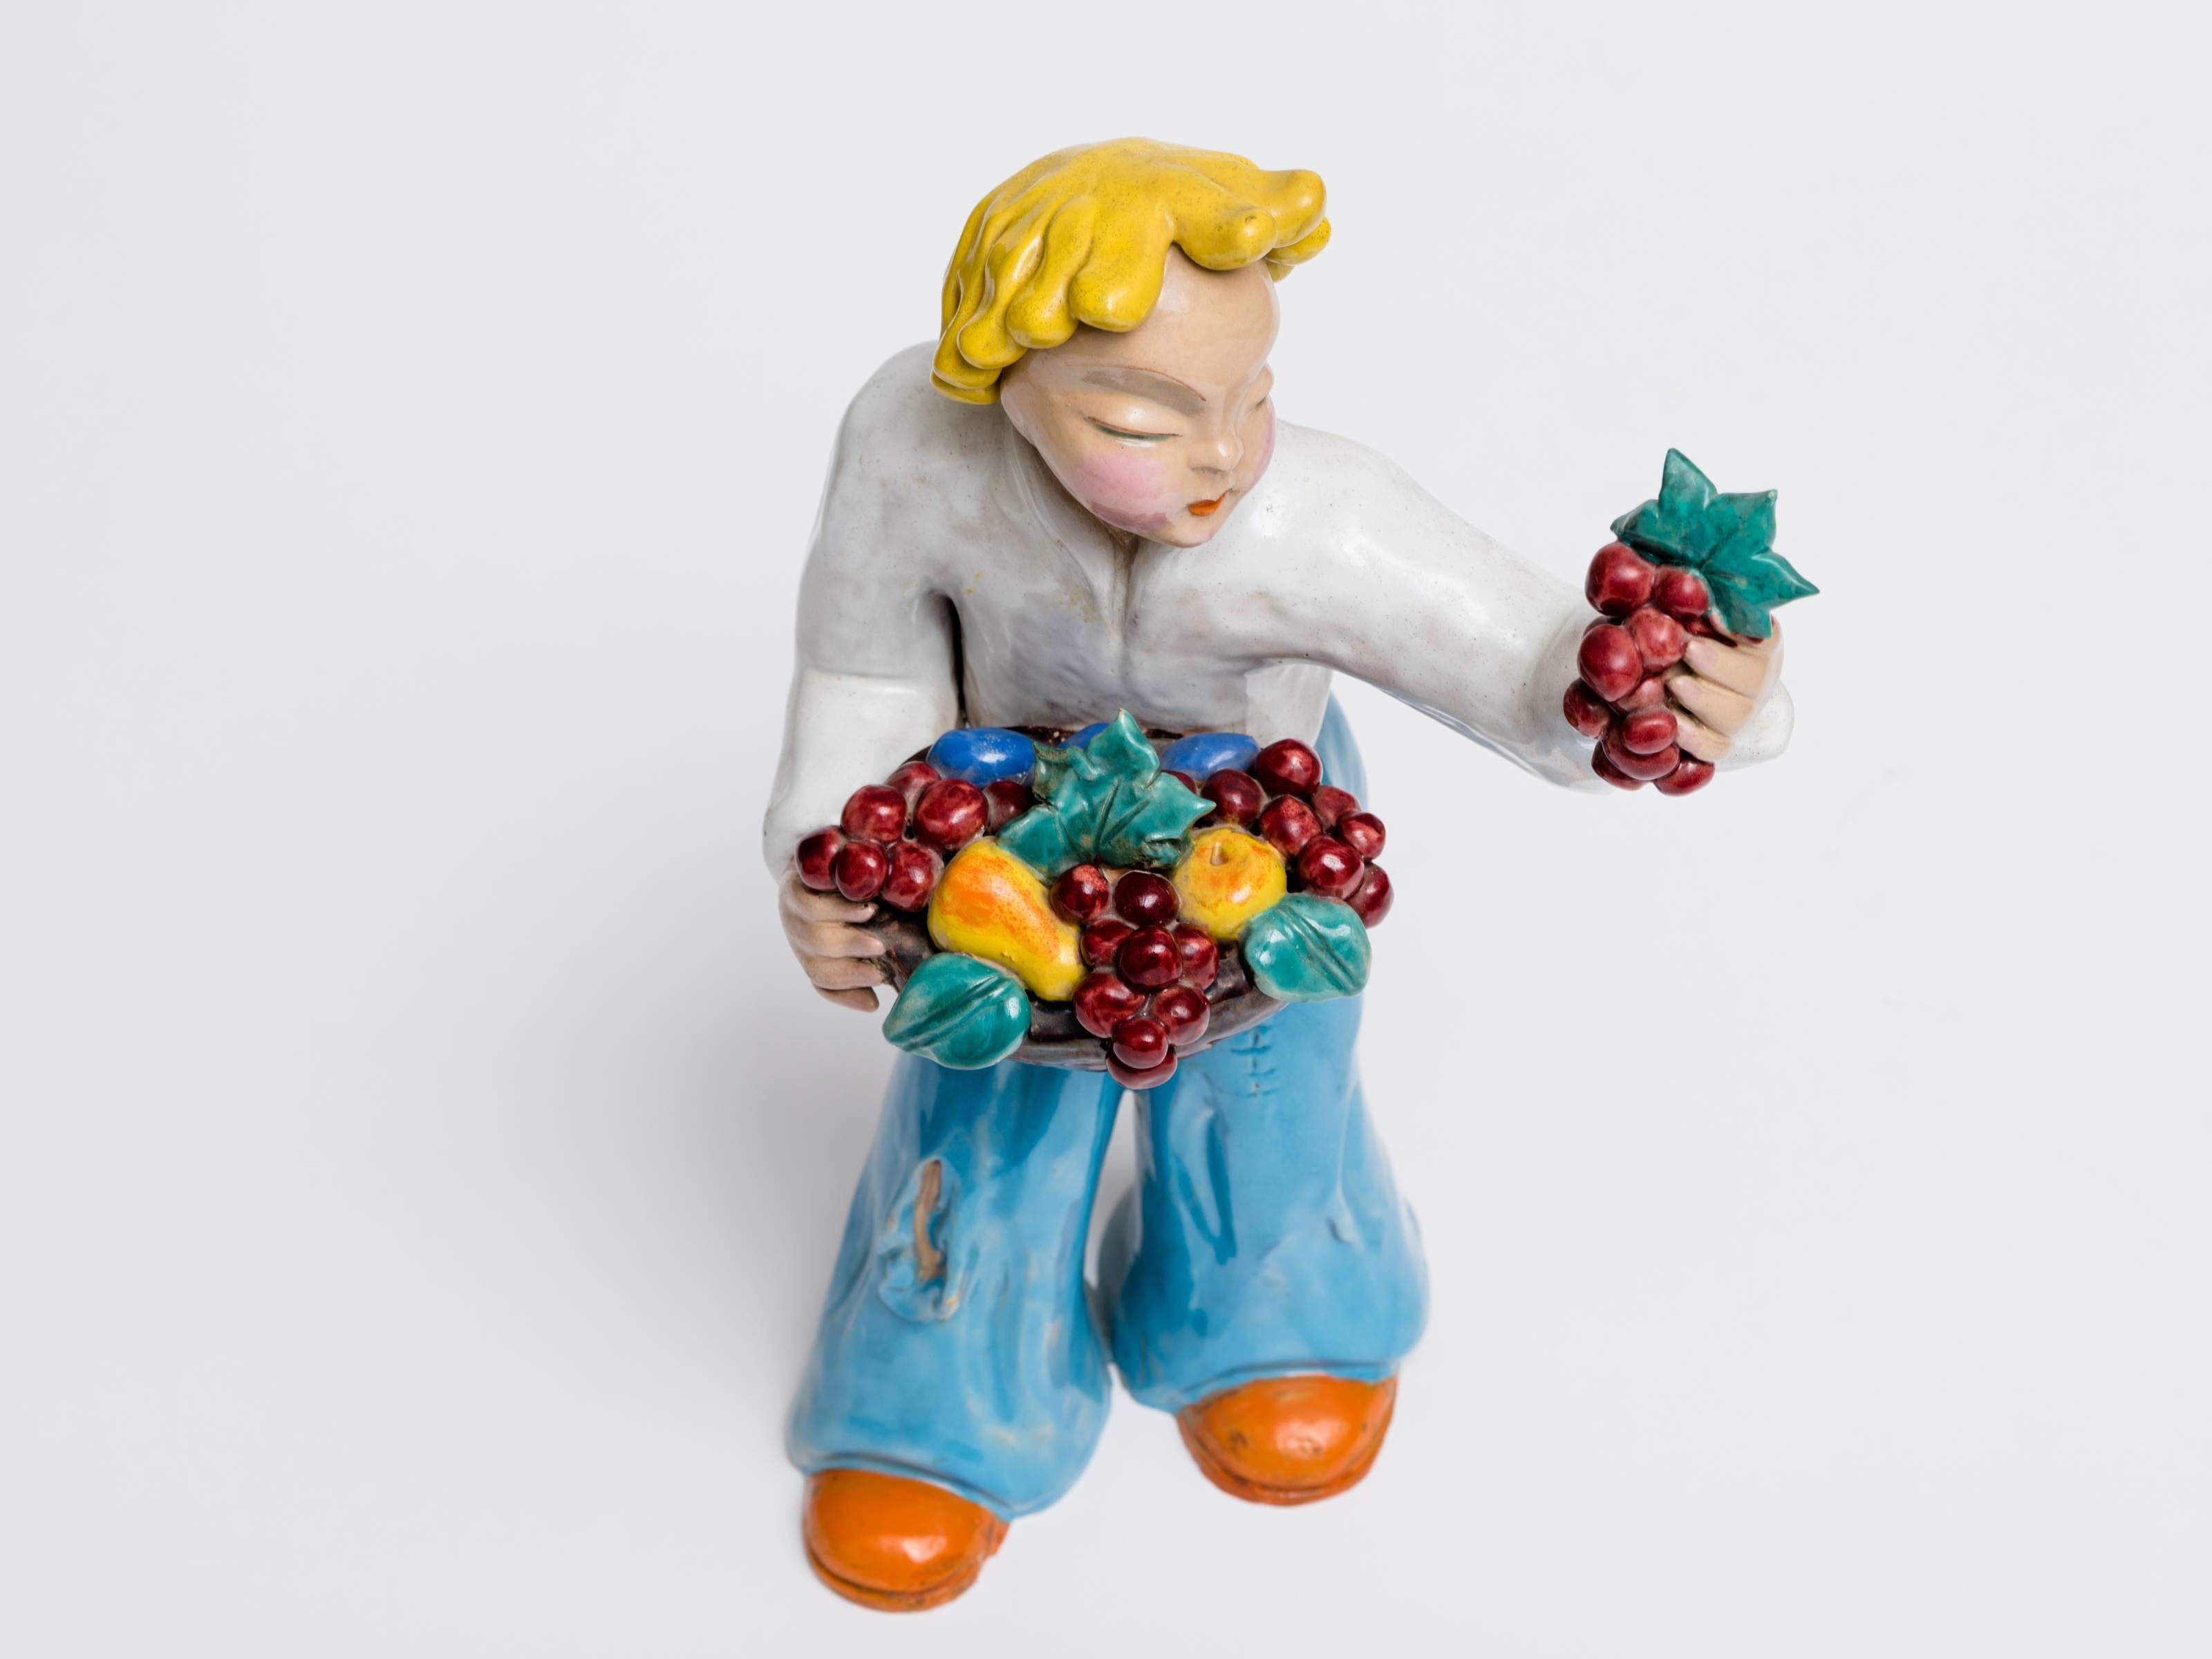 Fabulous and large Maria H. Rahmer (1911-1998) figural sculpture of a boy holding fruit circa 1930s from Hungary. Great ceramic condition with signature H. Rahmer on the side of the leg.  A great period ceramic sculpture!
